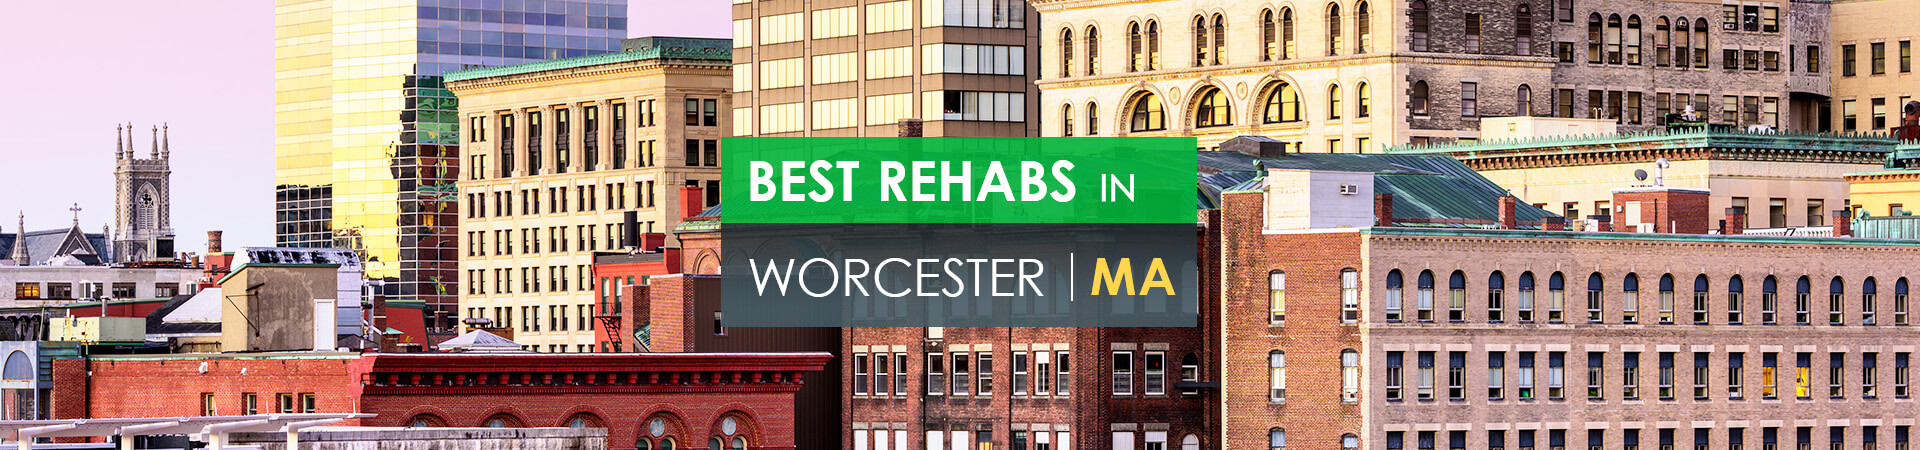 Best rehabs in Worcester, MA